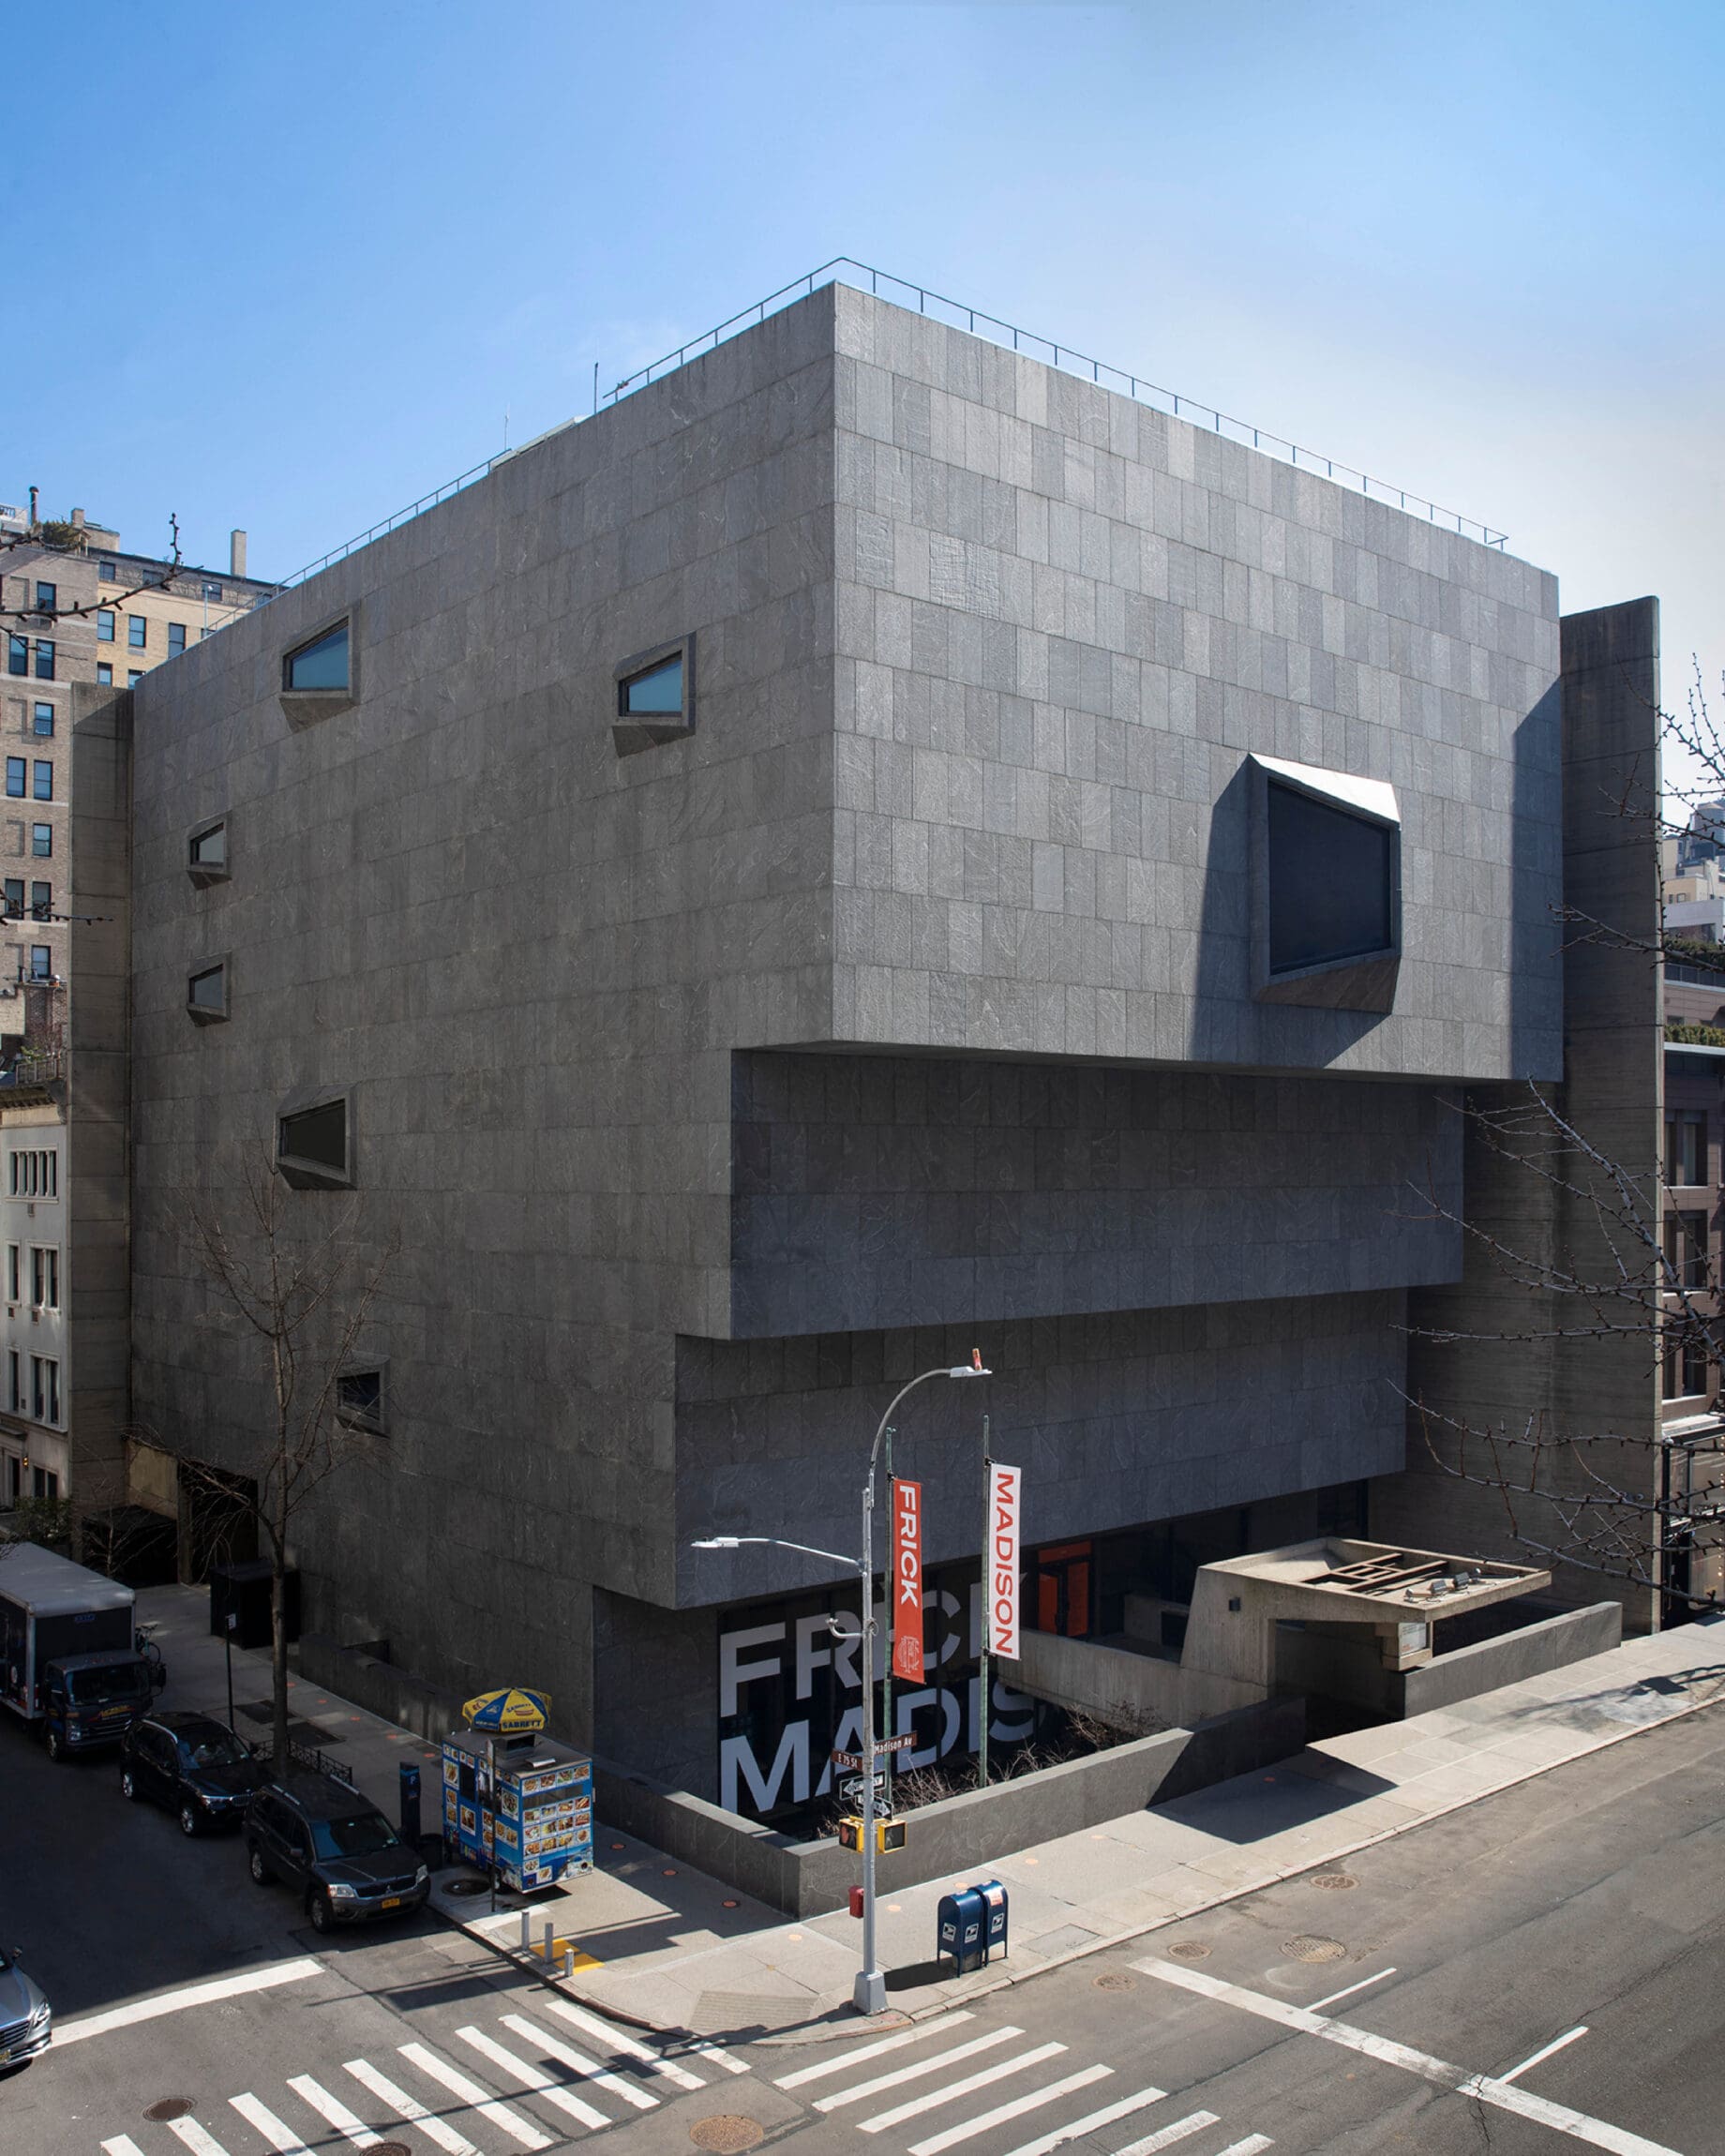 The best art galleries and museums in New York City | Exterior of Marcel Breuer building that houses Frick Madison, the museum's temporary home